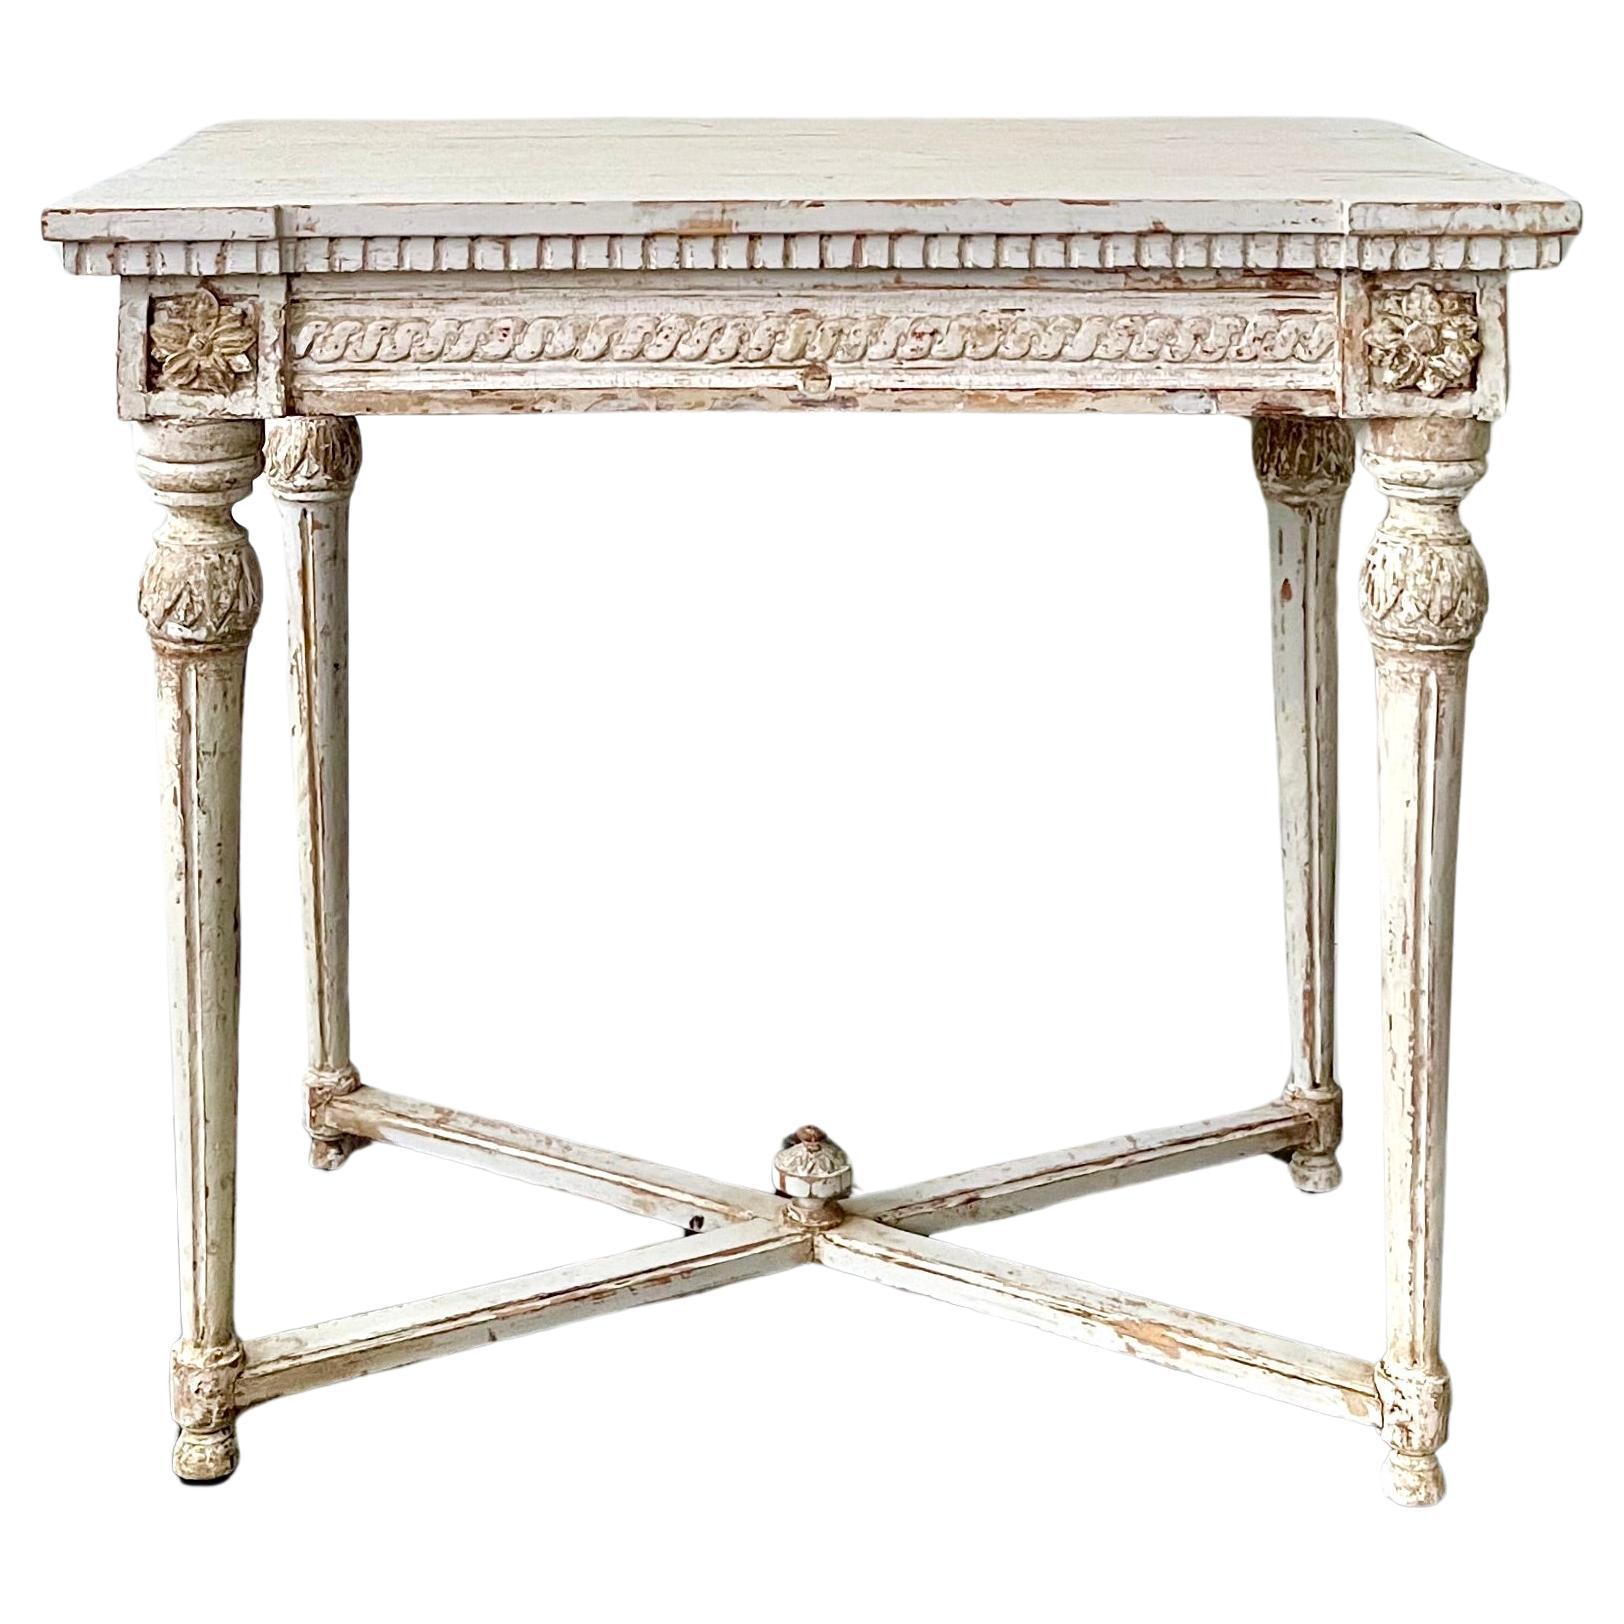 Early 19th Century Swedish Gustavian Neoclassical Painted Console Table